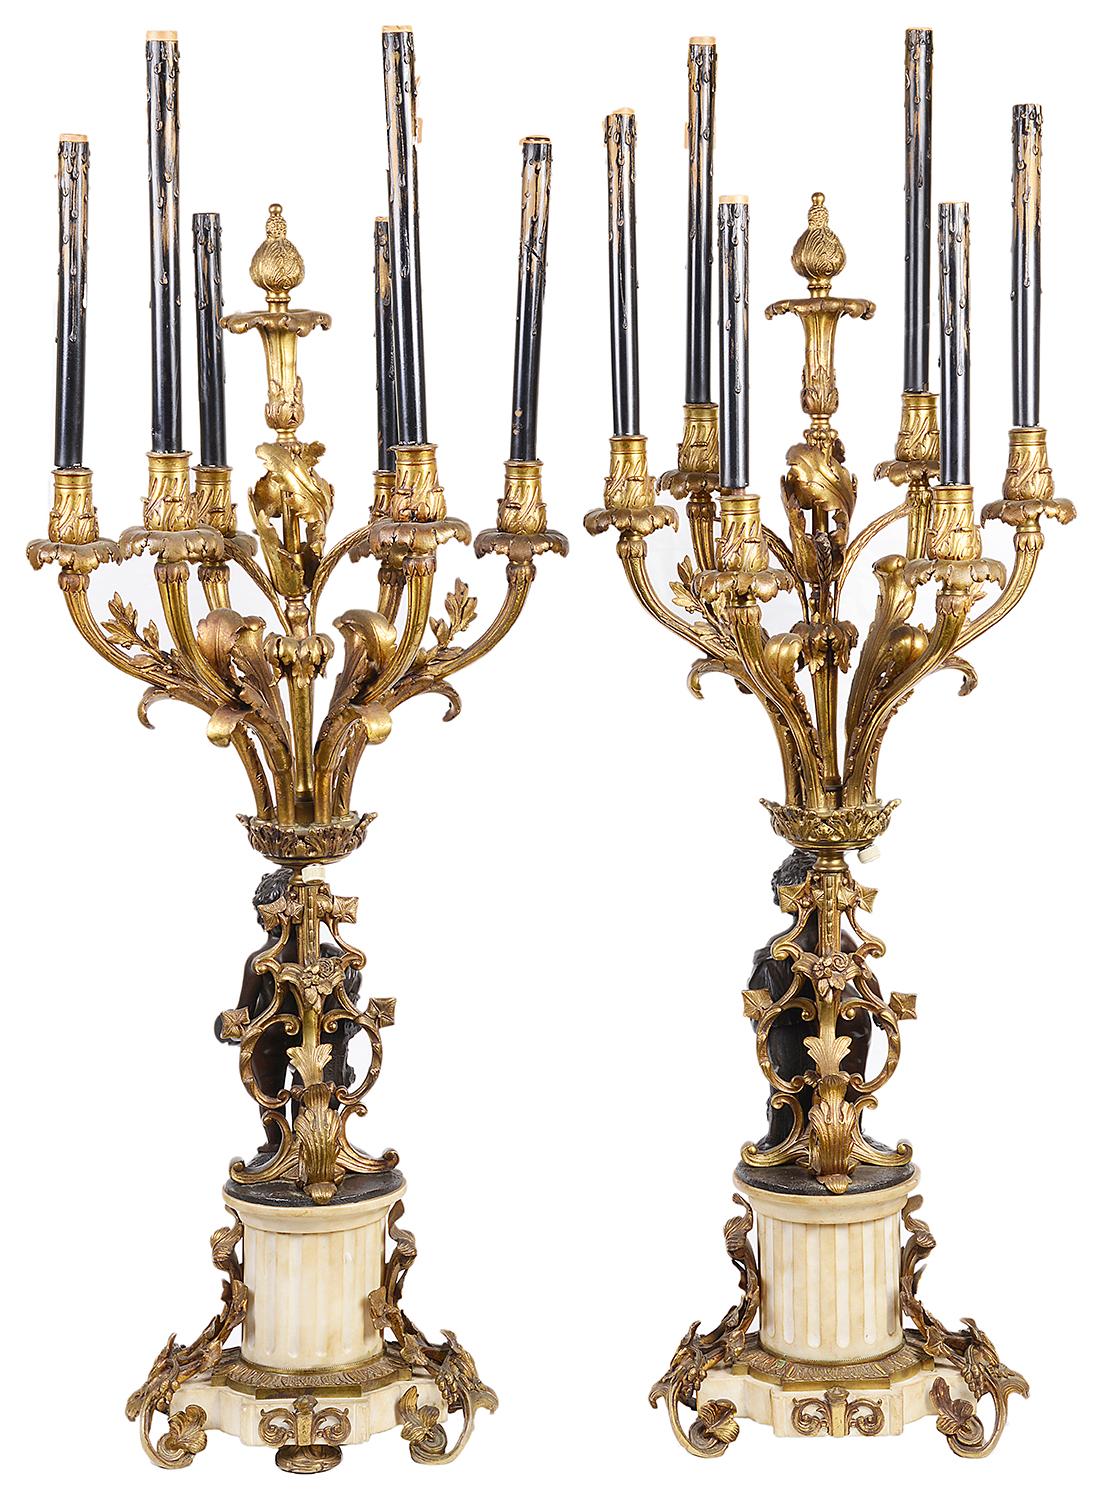 An impressive pair of 19th century French gilded ormolu, bronze and white marble candelabra, each having six scrolling foliate branches with candle sconces, above a pair of bronze semi clad putti, on a sculptor the other an artist, raised on